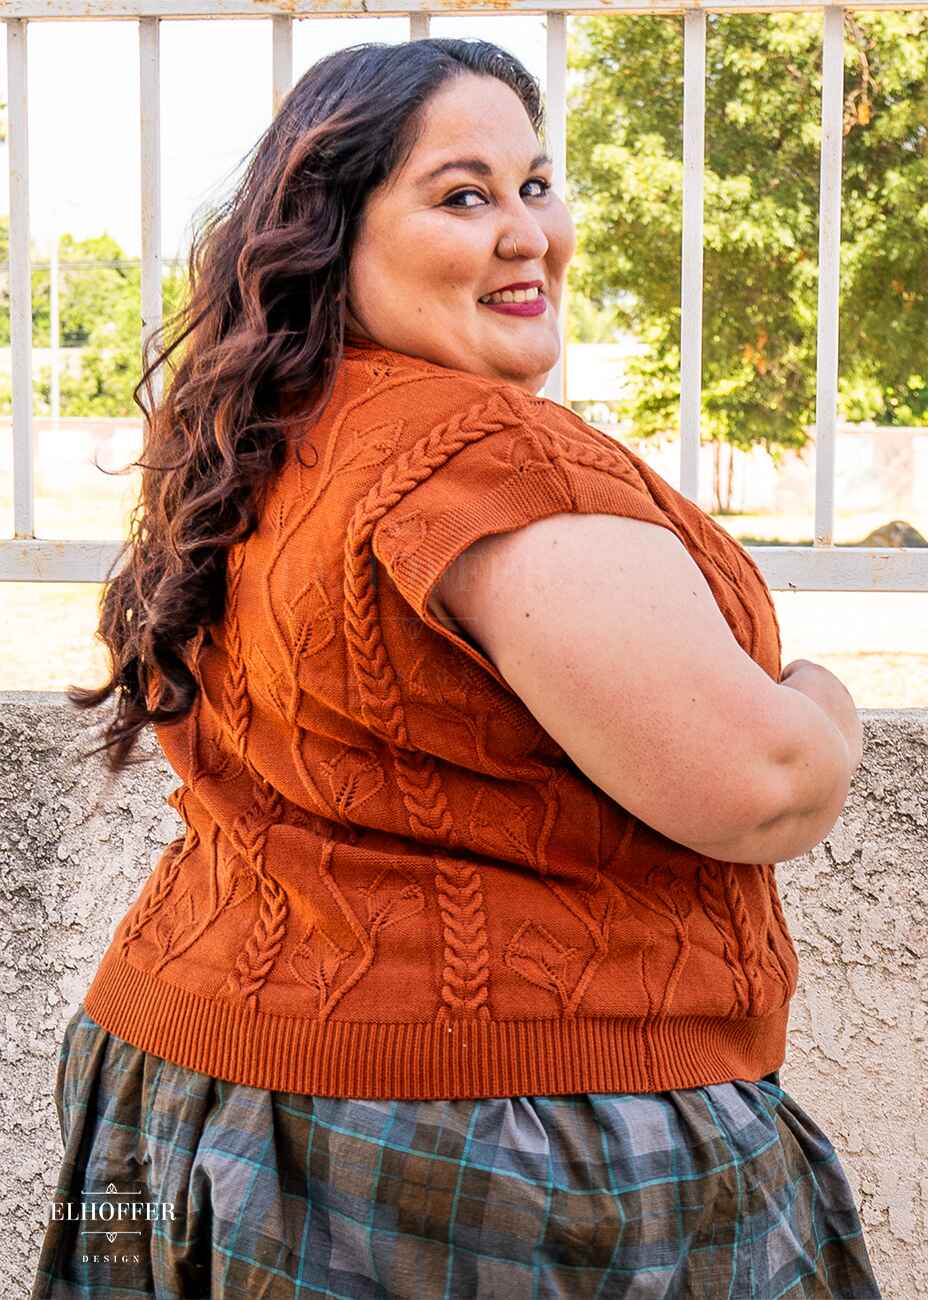 Alysia is modeling the Production L (3XL-4XL). She has a 52” Chest, 46” Waist, 55” Hips, and is 5’4”. She generally wears a 2XL in our pieces.